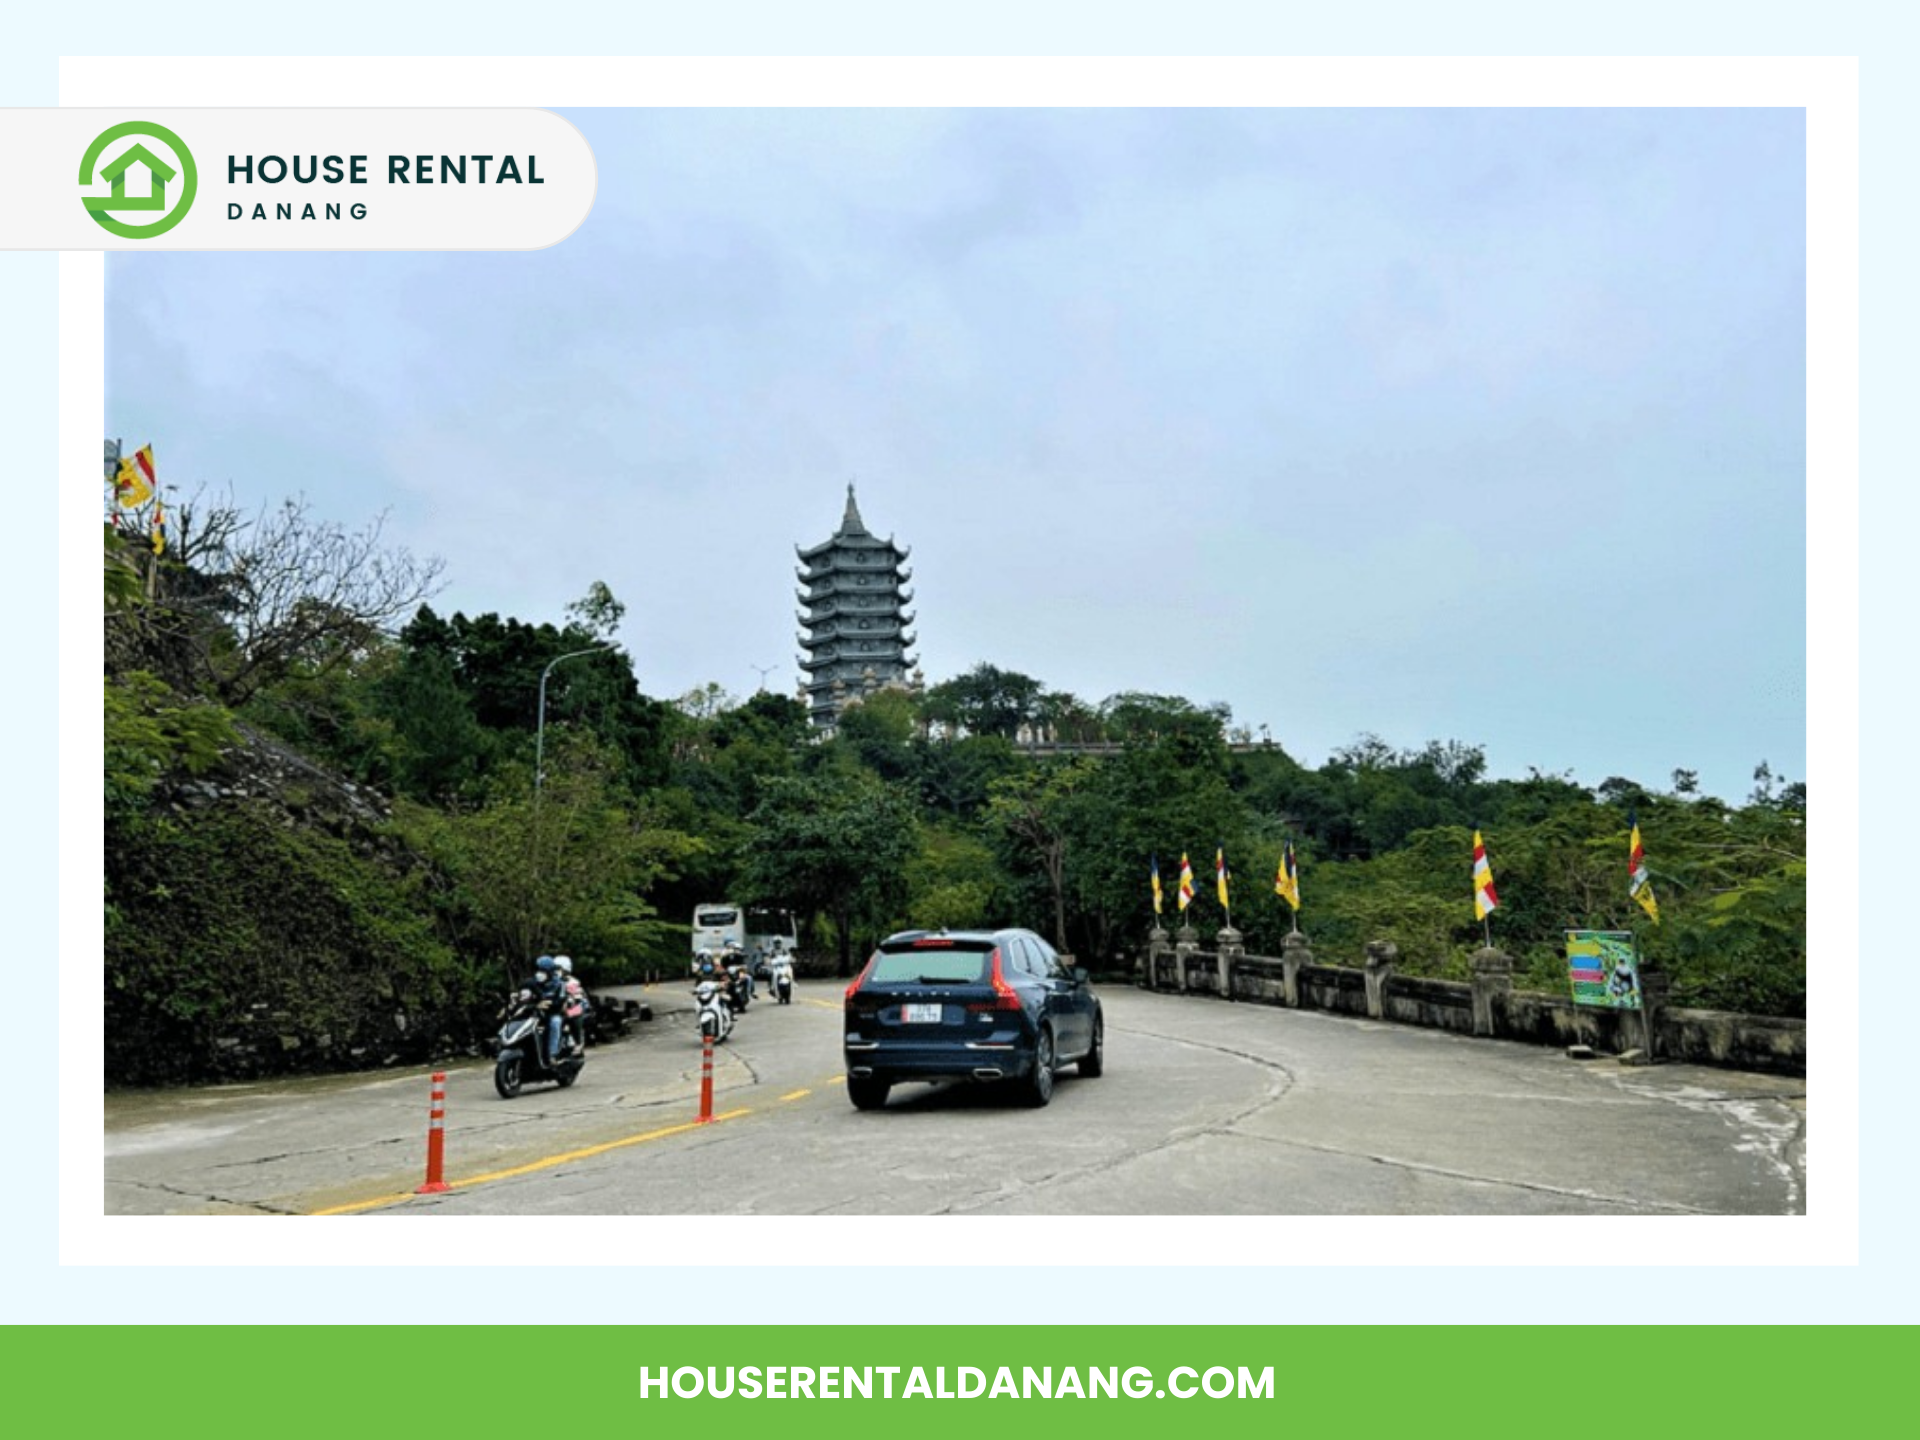 Cars and motorcycles travel along a road leading to Linh Ung Pagoda atop a hill, surrounded by greenery. Several flags are displayed along the roadside. The image is framed with a banner for "House Rental Danang.